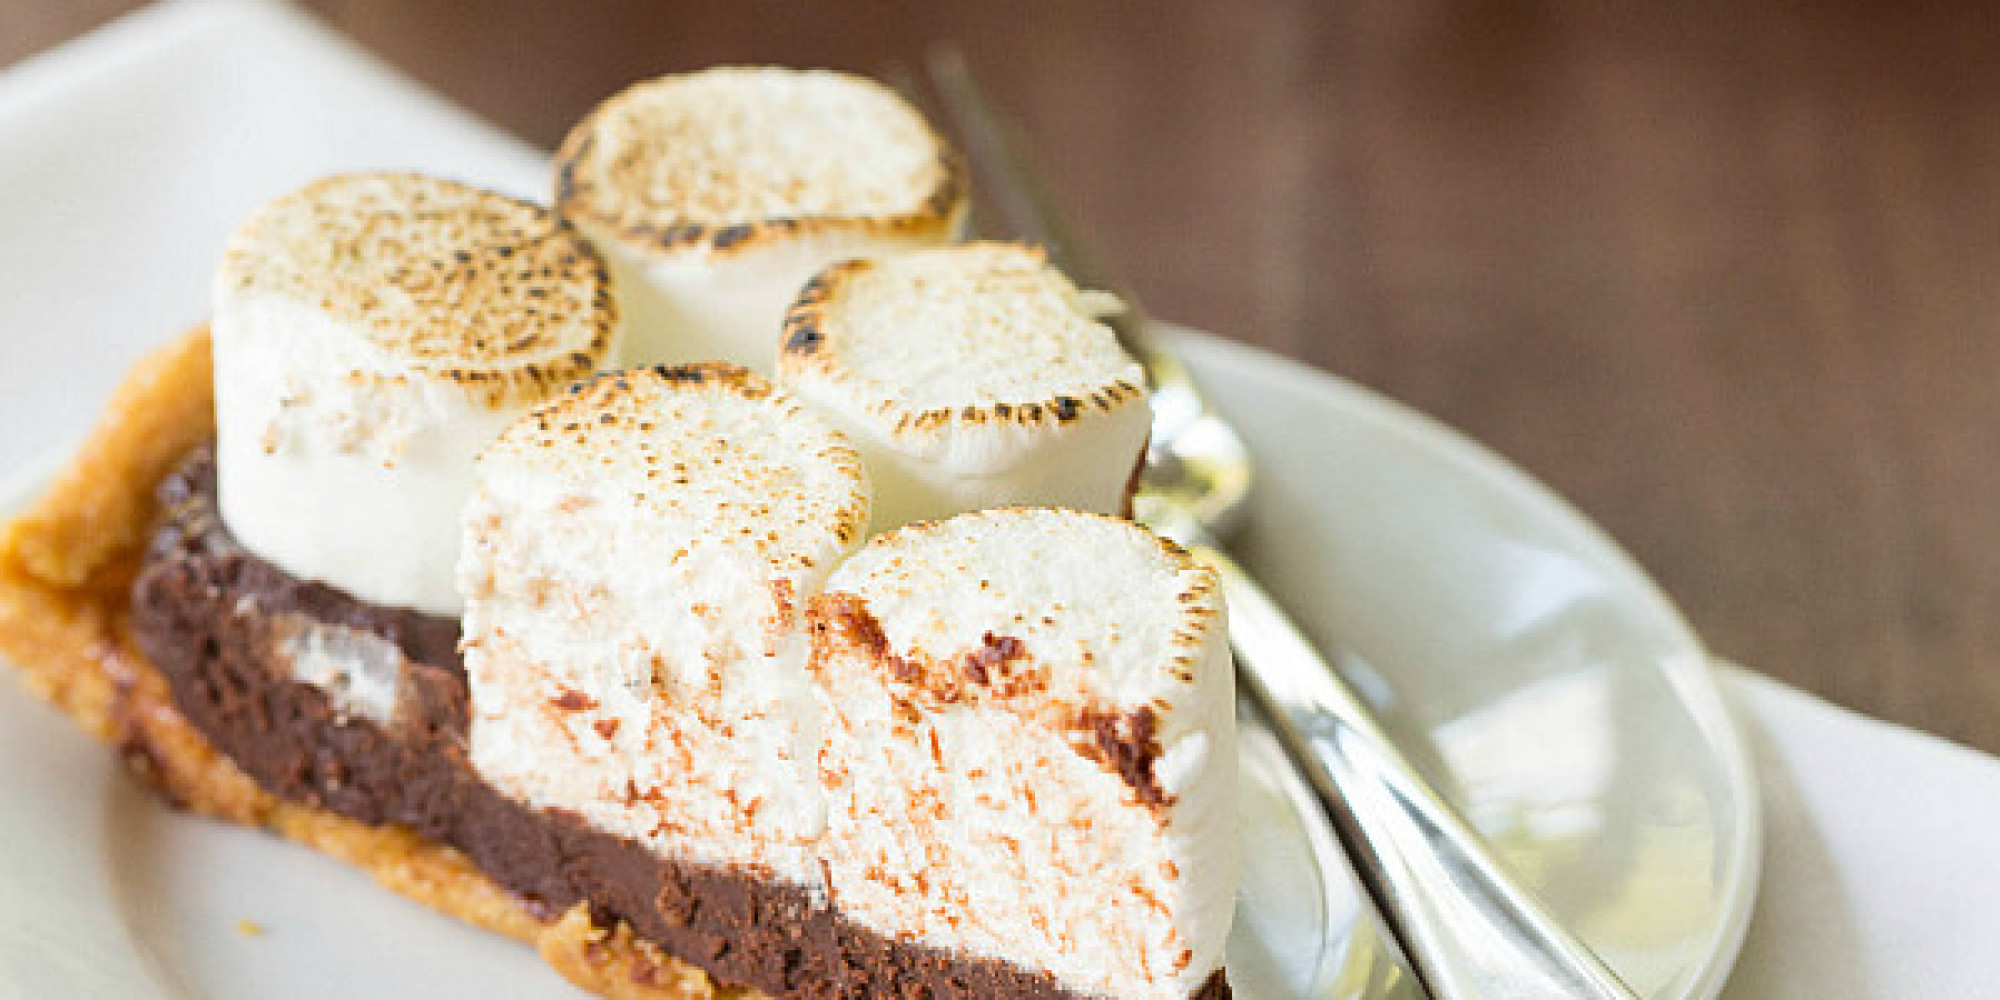 Easy Dessert Recipes With Pictures
 9 Beautiful Desserts That Are Dangerously Easy To Make